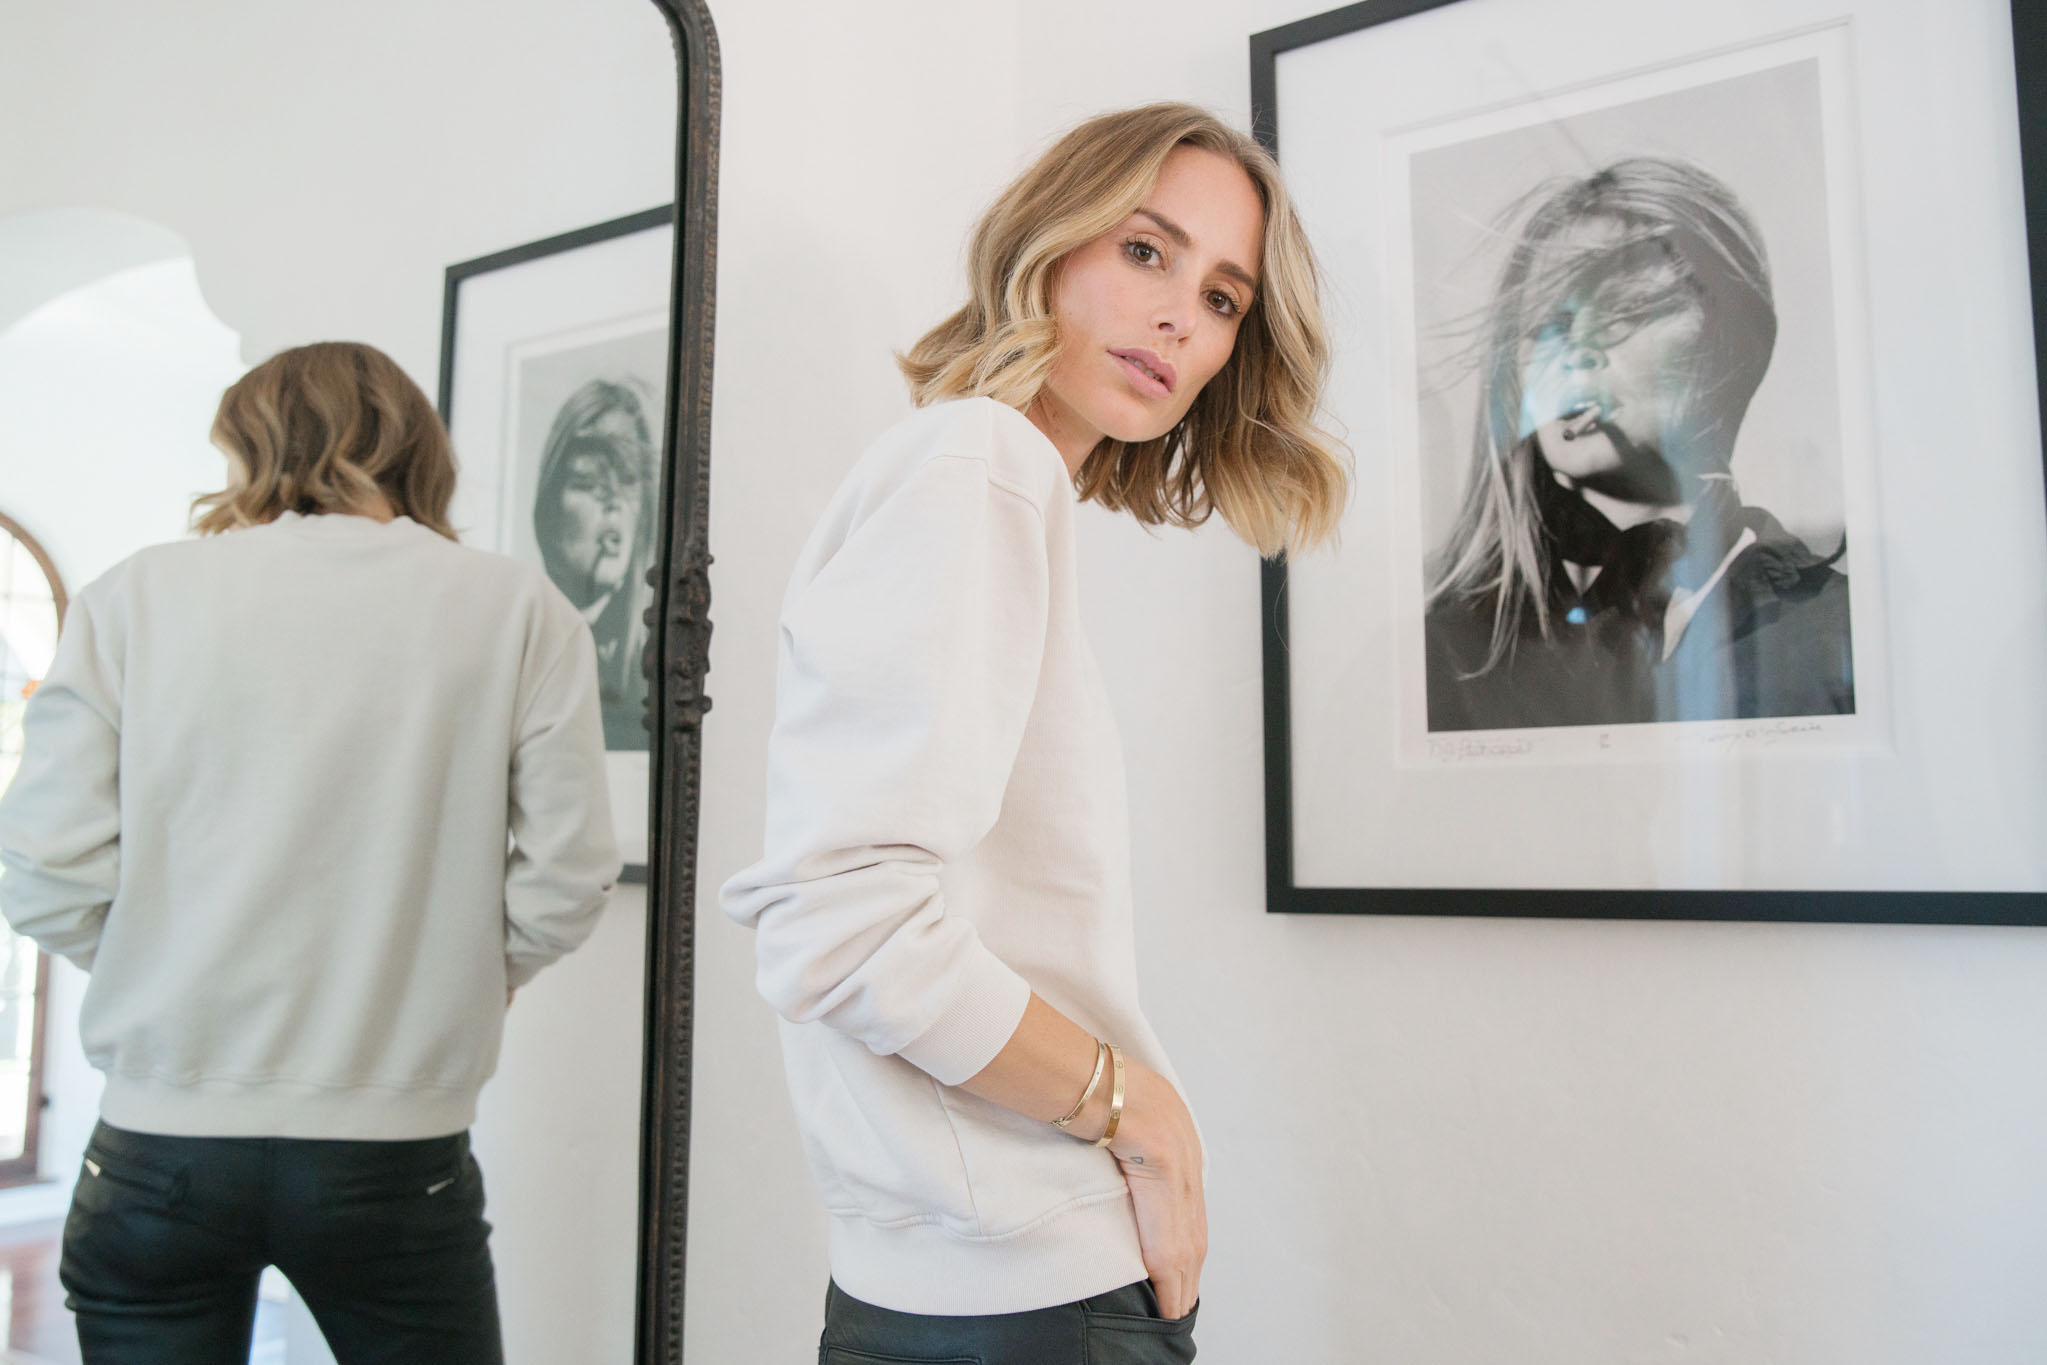 Anine Bing talks to The Lifestyle Edit about going from blogger to founder